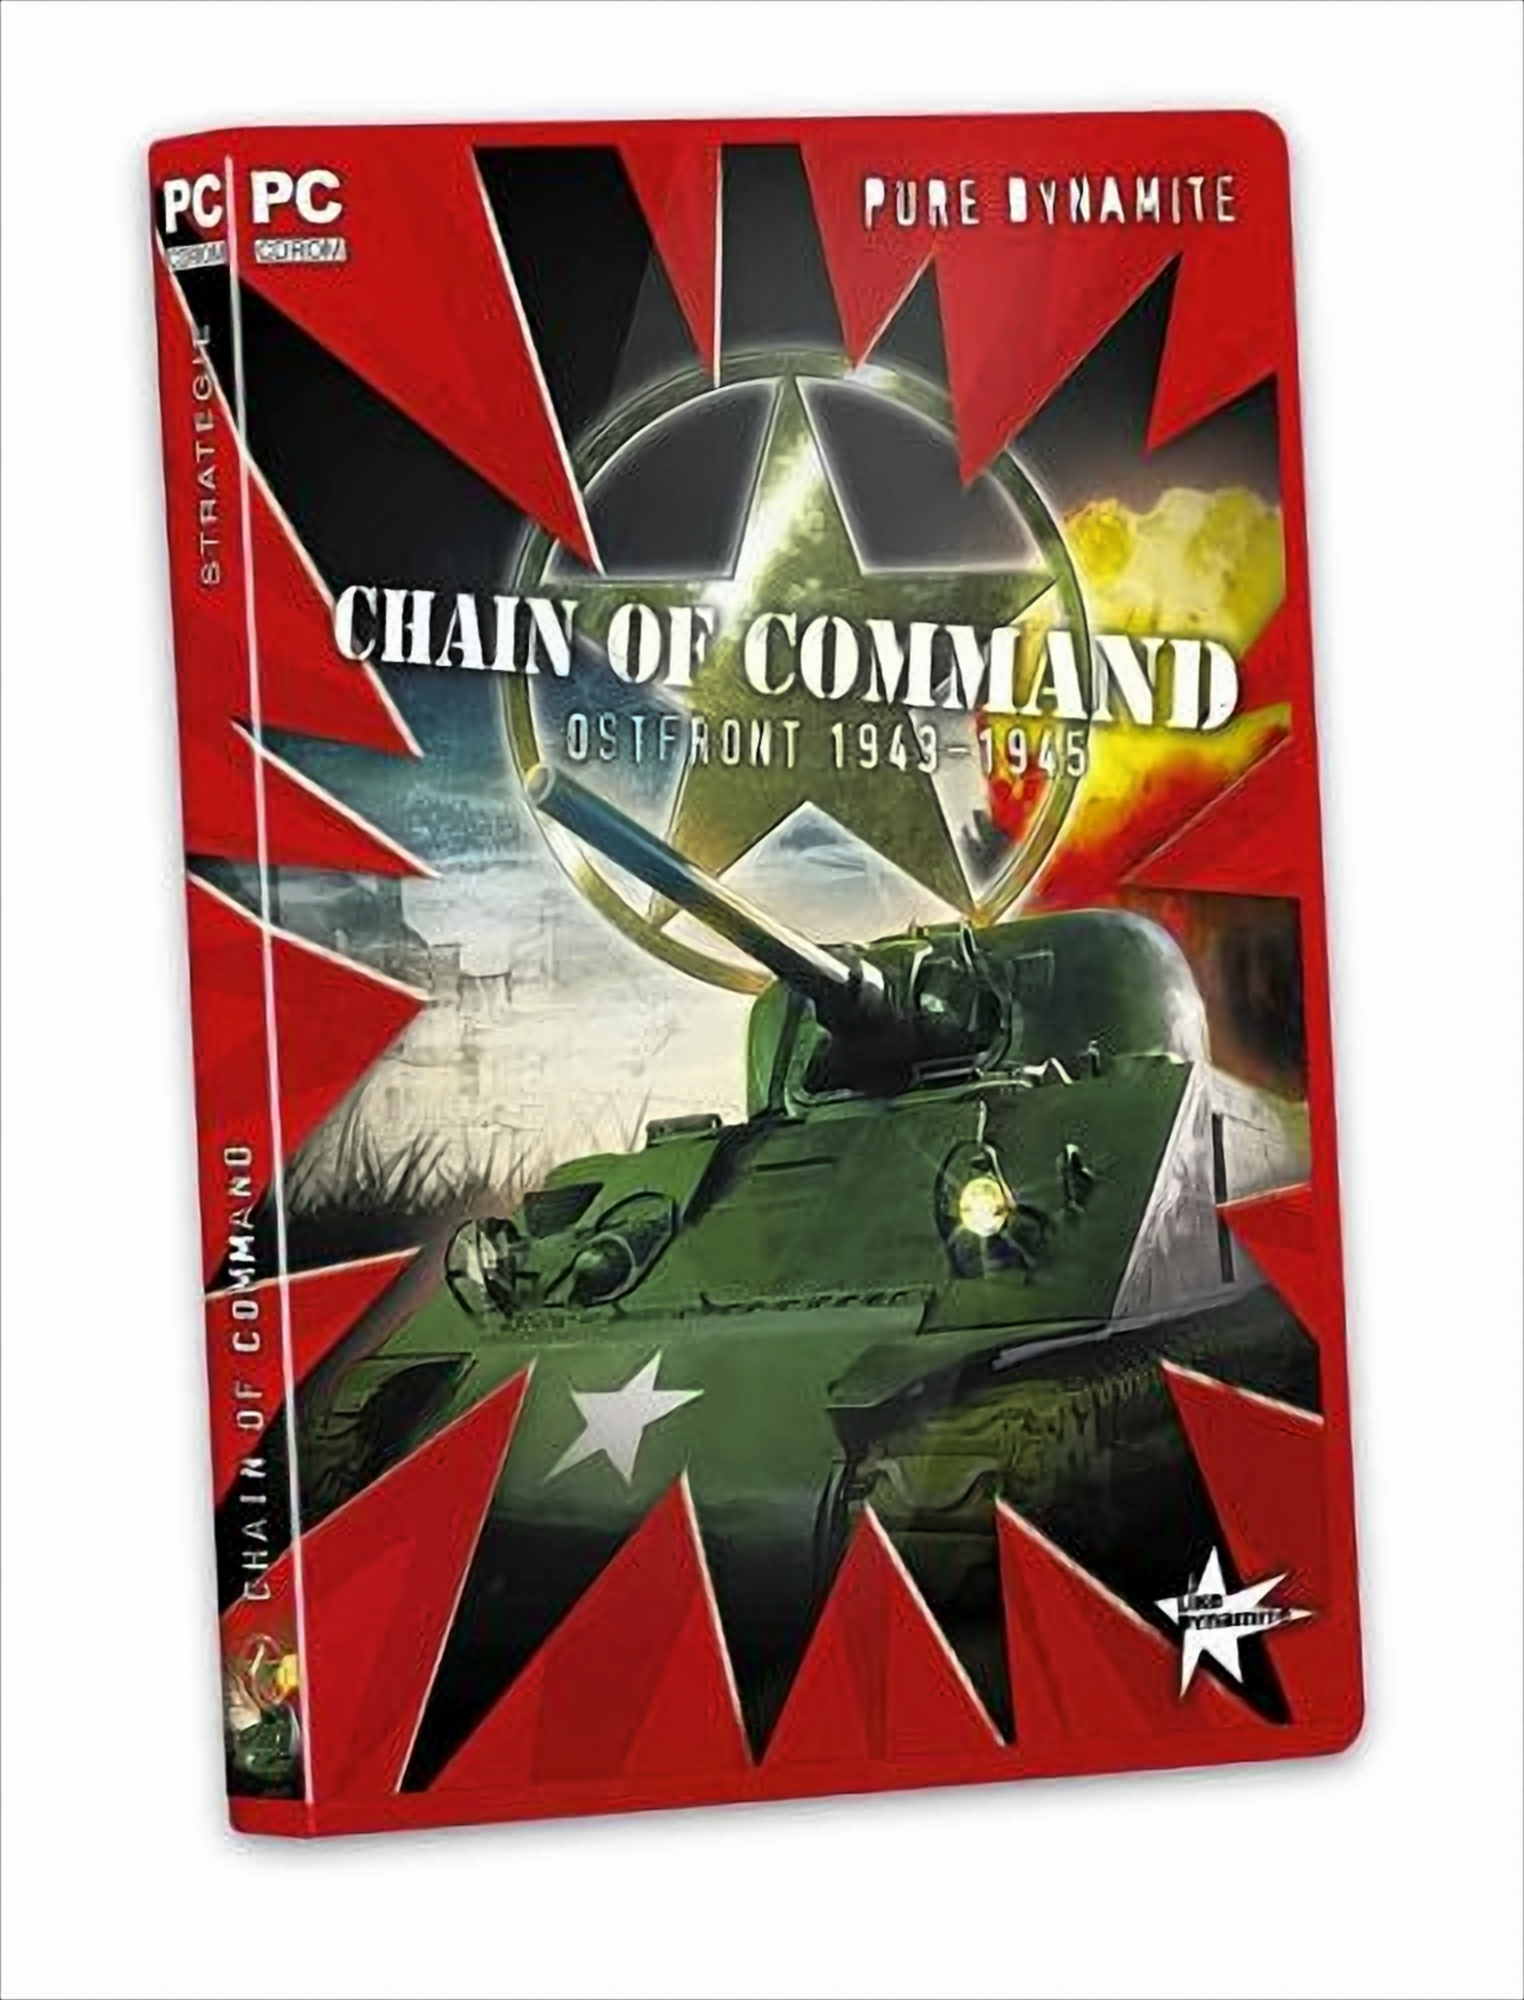 Chain of Command: Ostfront 1943-1945 [PC] [Pure Dynamite] 